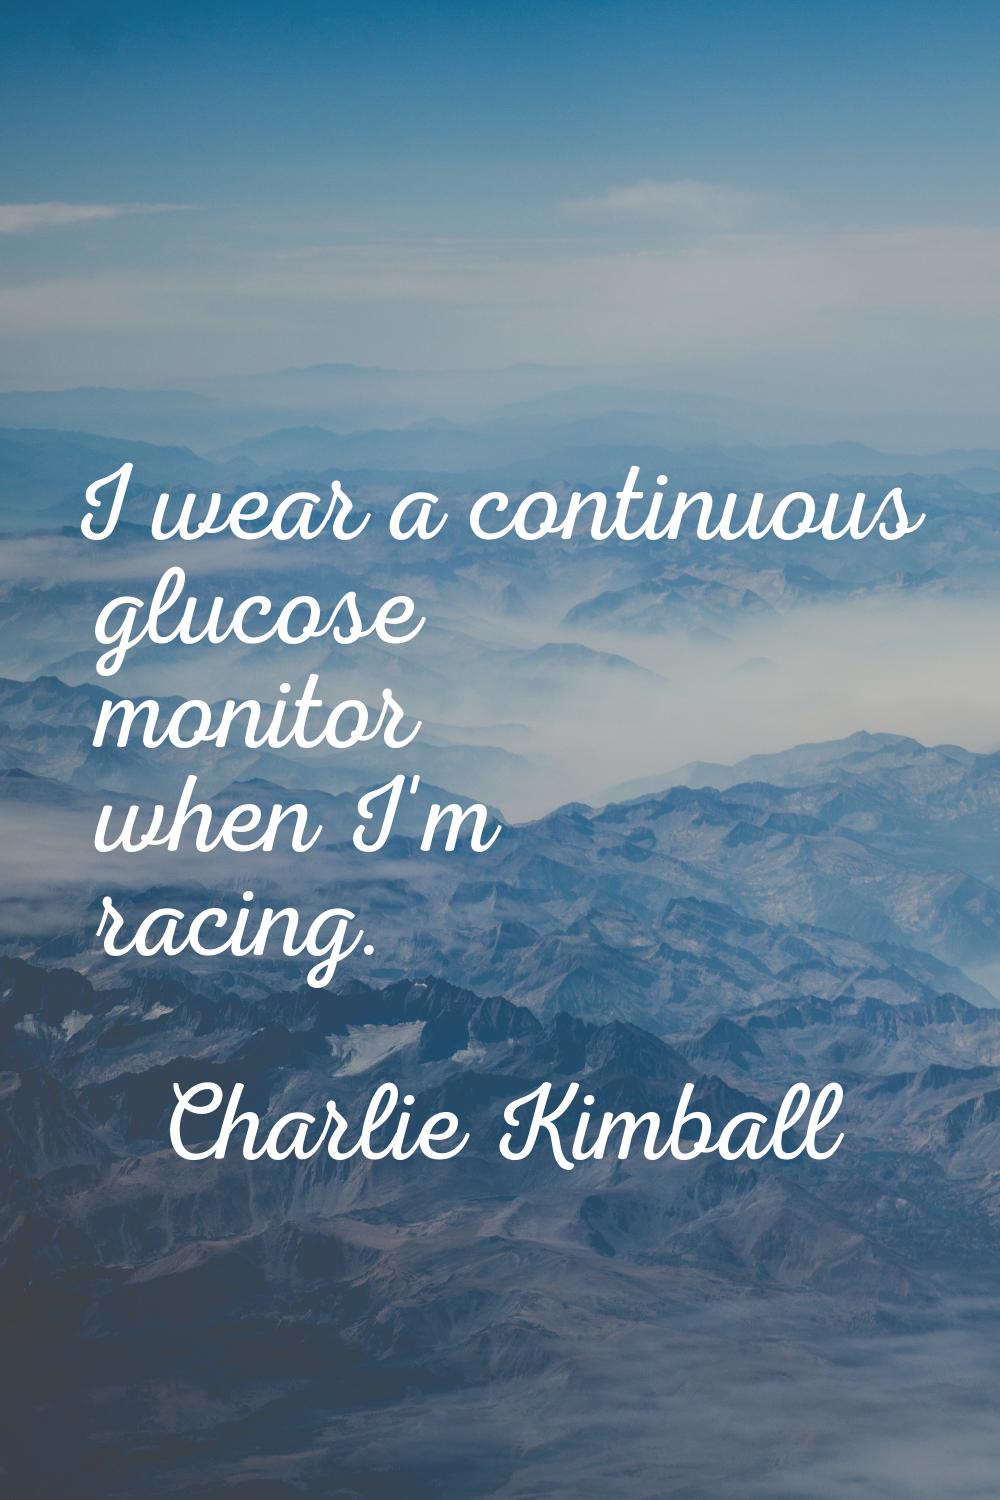 I wear a continuous glucose monitor when I'm racing.